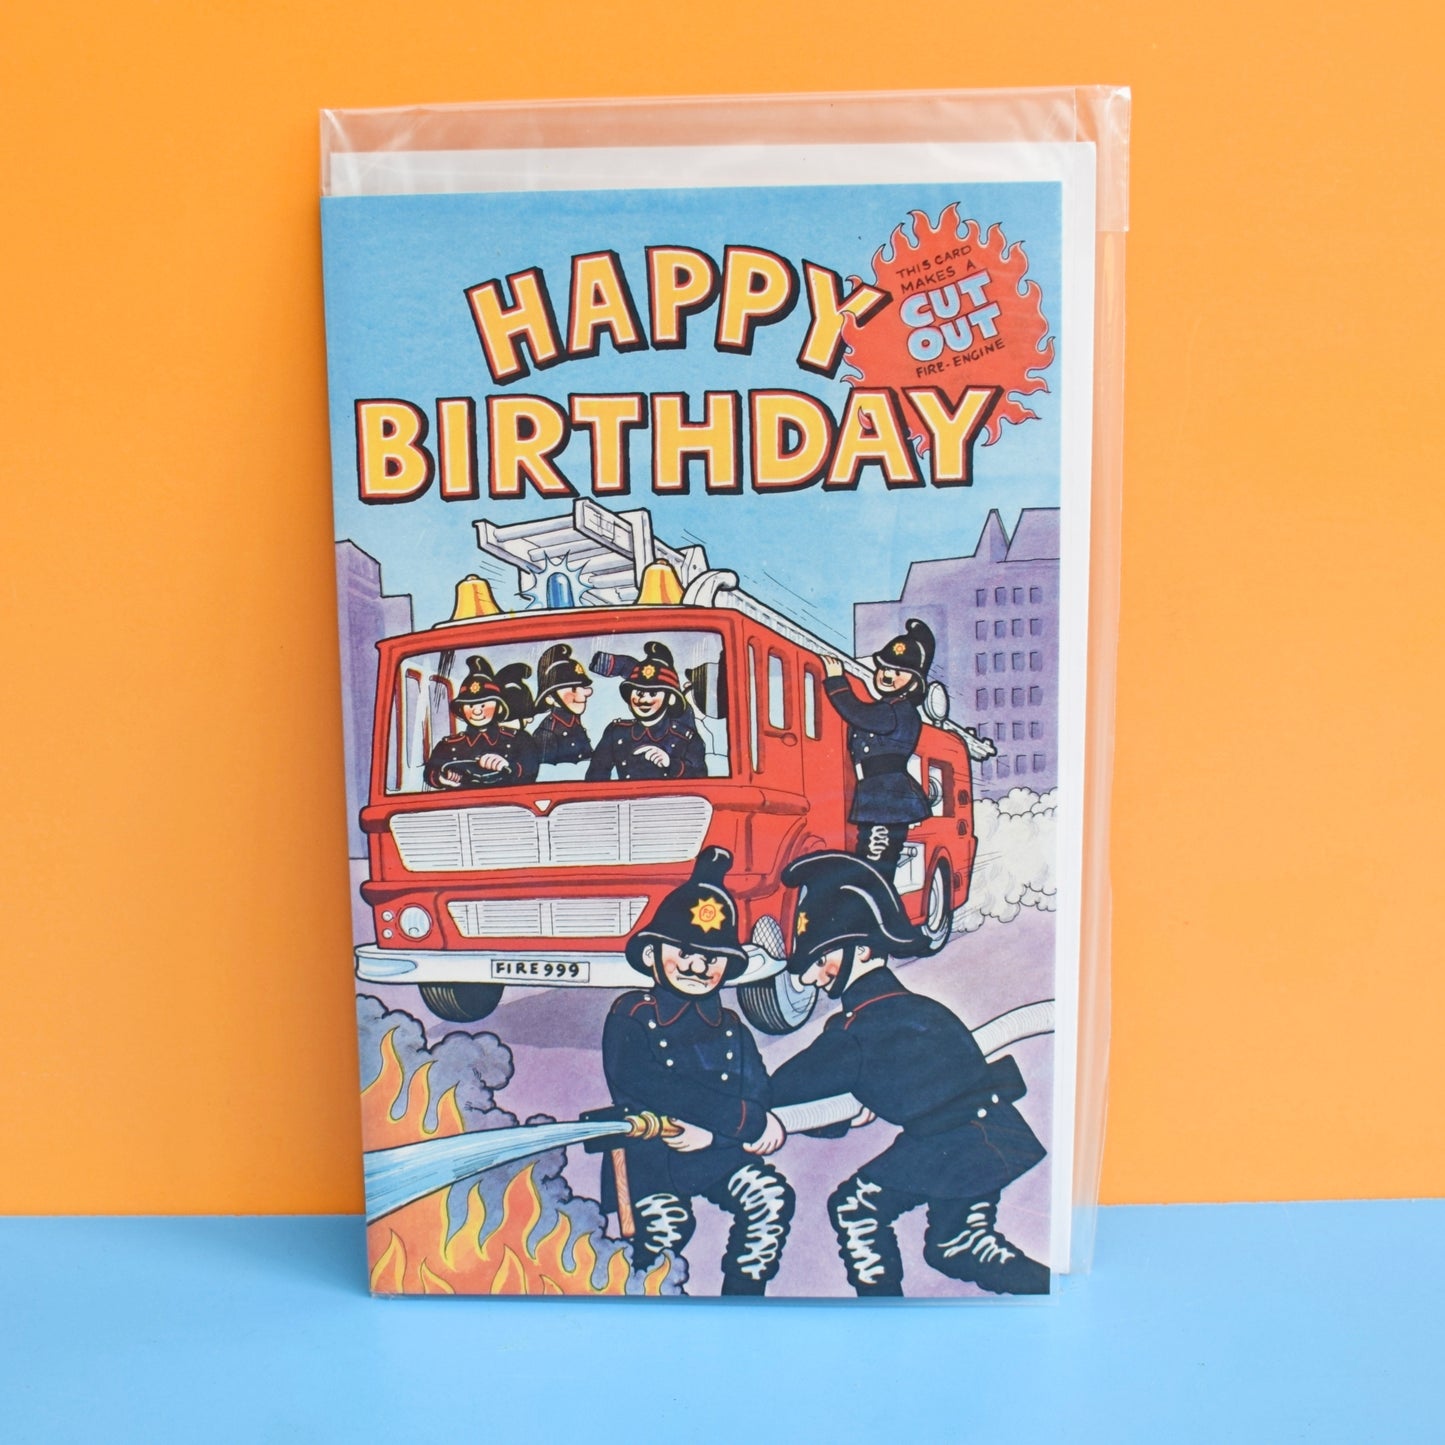 Vintage 1970s Greeting Card - Cut Out - Happy Birthday - Fire Engine